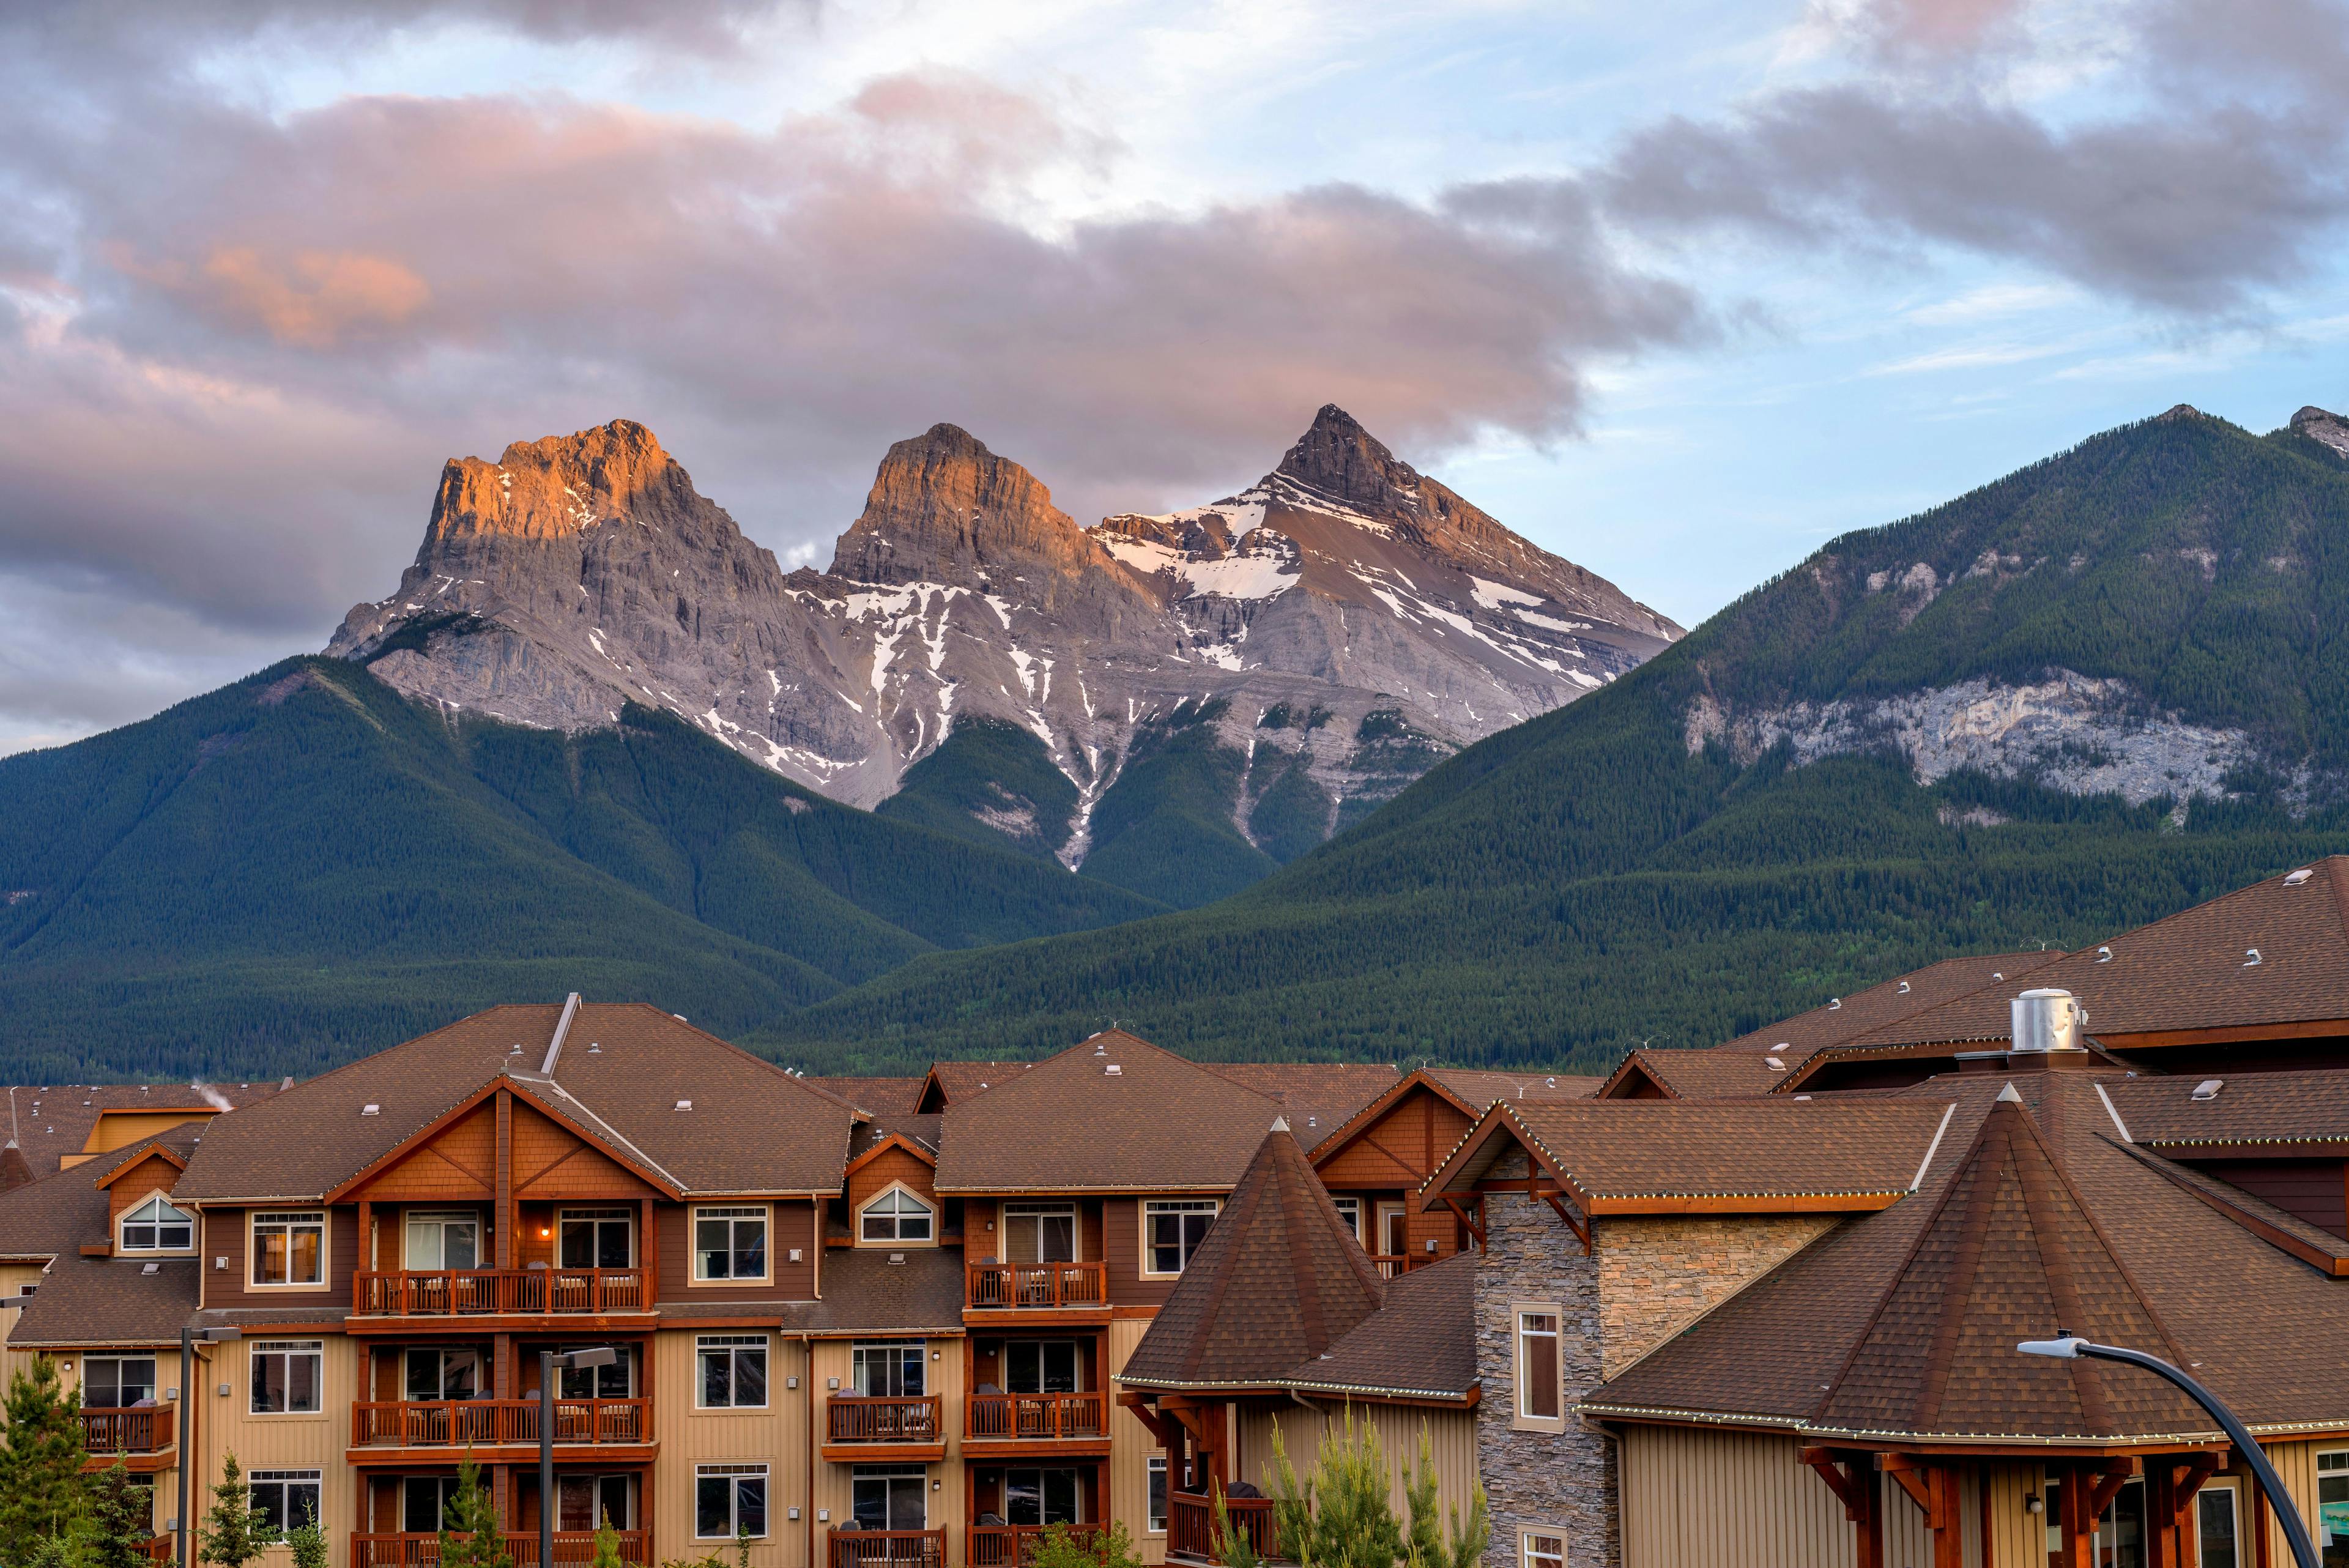 The Three Sisters - A Spring sunset view of The Three Sisters mountain, seen from town of Canmore, Alberta, Canada | Image Credit: © Sean Xu - stock.adobe.com